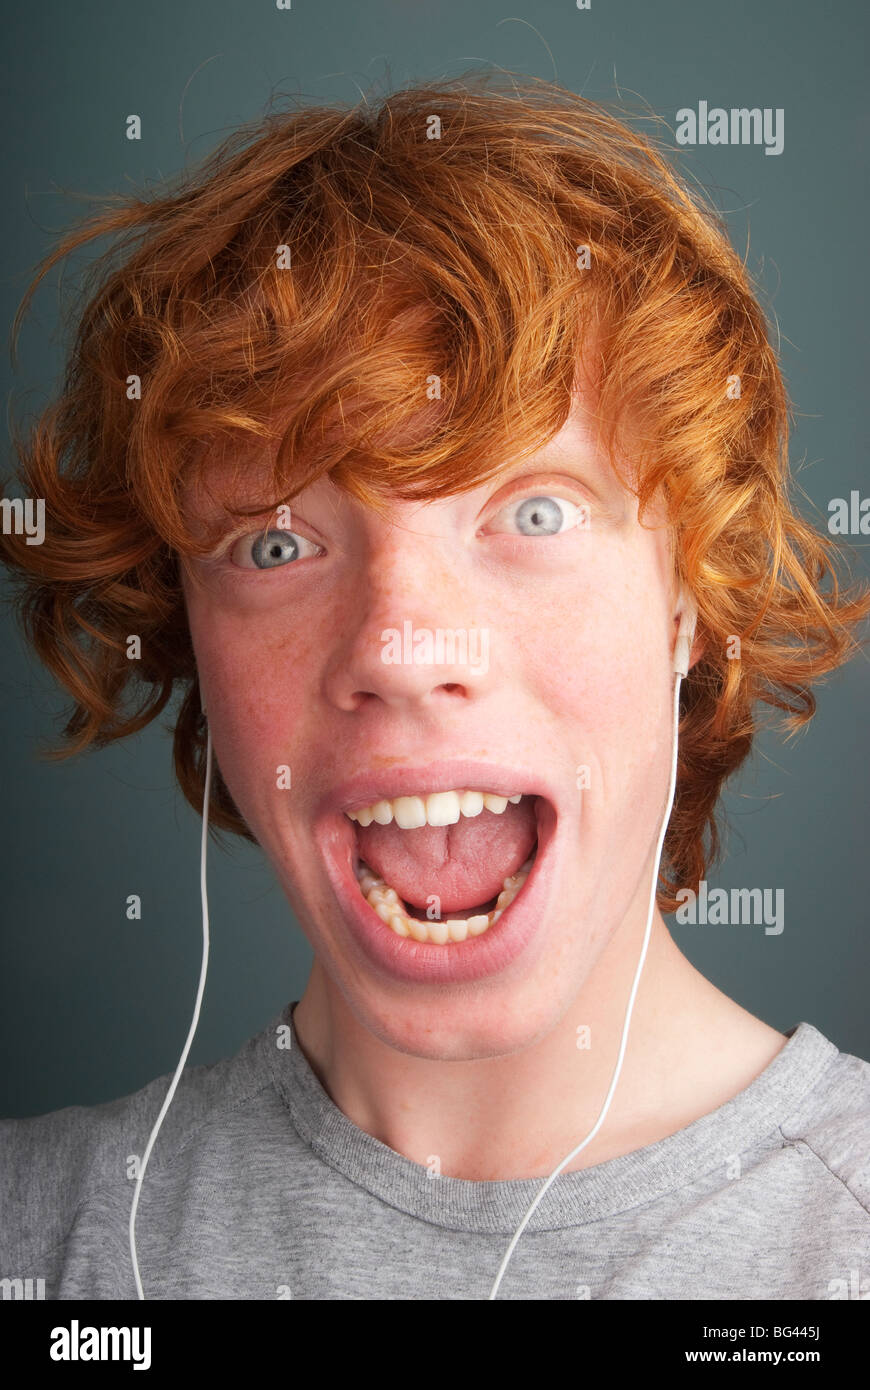 Ginger haired teenage boy listens to music Stock Photo